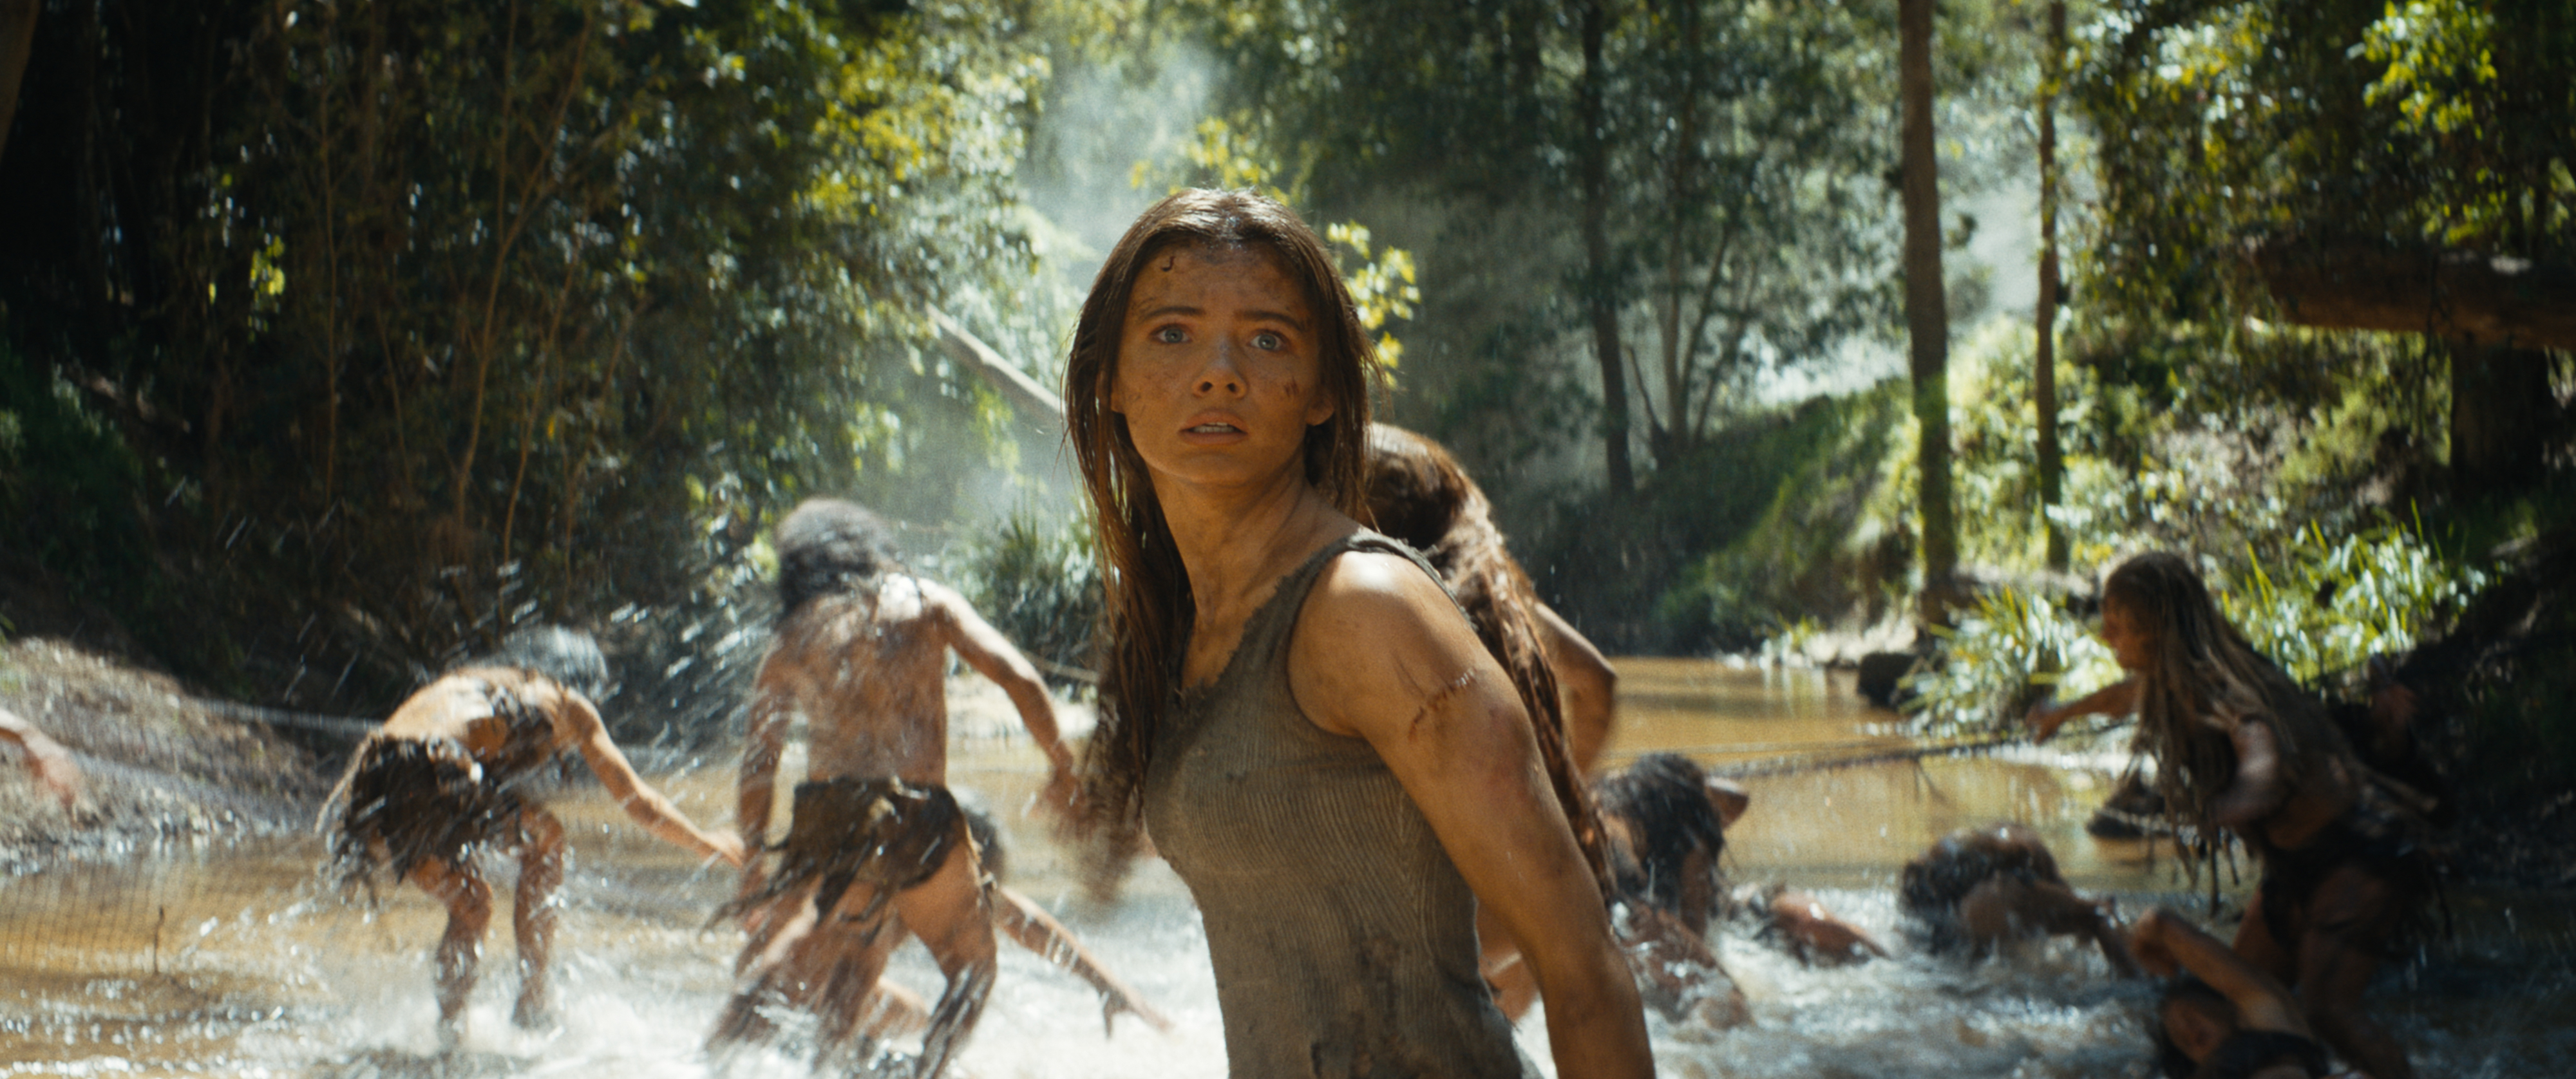 Woman in prehistoric attire looks alarmed with others in background. Scene from a film